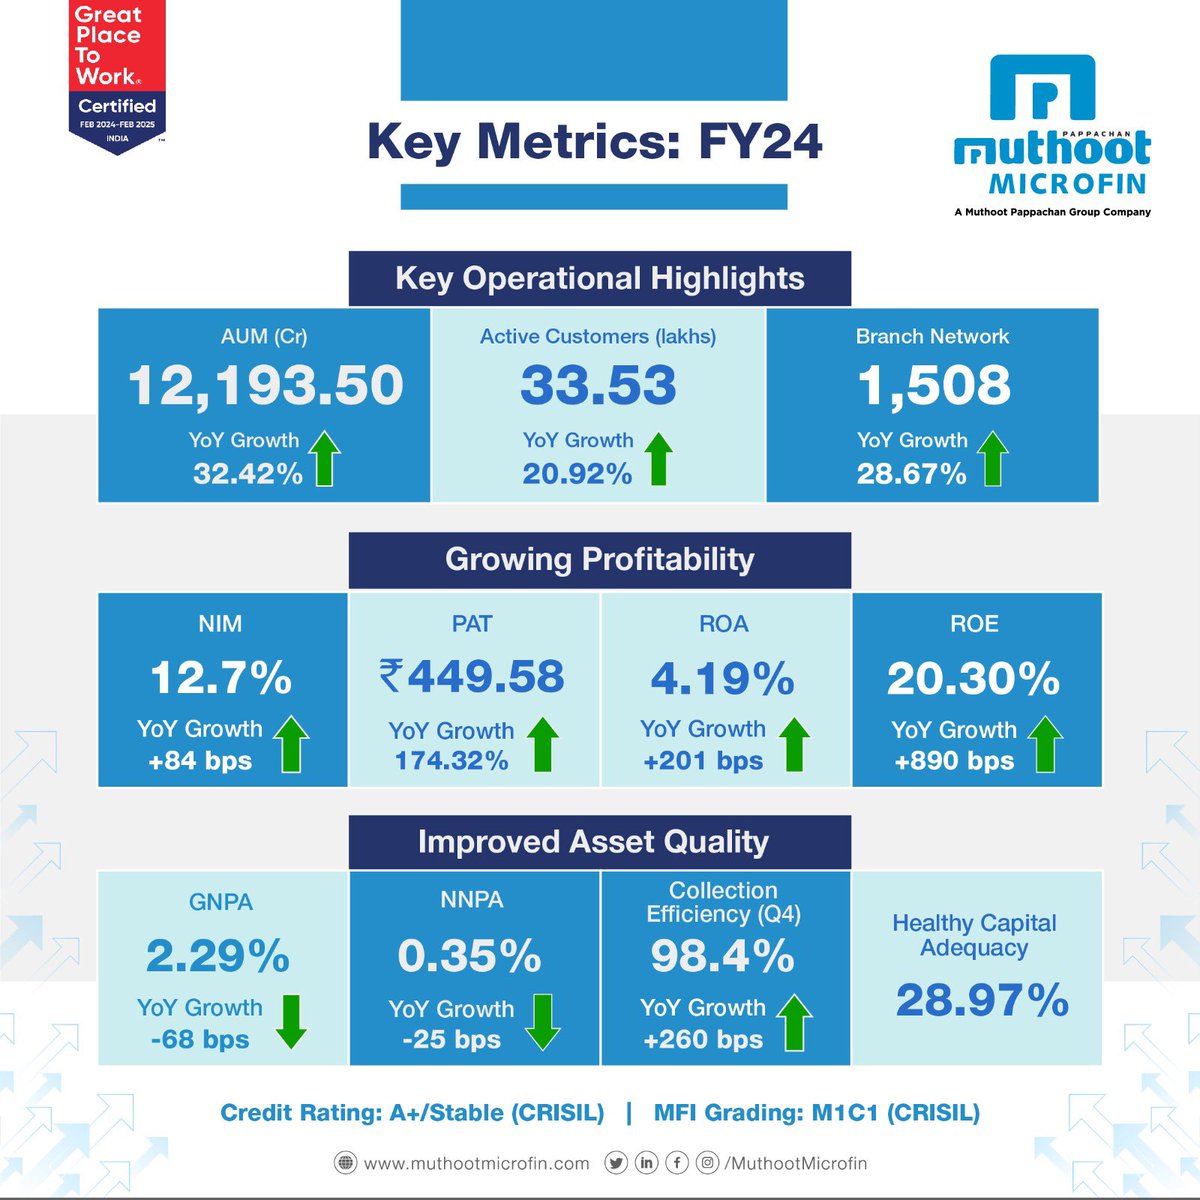 FY24 was a landmark financial year for @MuthootMicrofin 
- Highest disbursement in single FY ₹10,661 cr 
- Highest number of new branches opened in a single year 336 ( overall branch network 1508) 
- Highest ever PAT of ₹449.6 crore 
- Robust asset quality with NNPA 0.35%, GNPA…